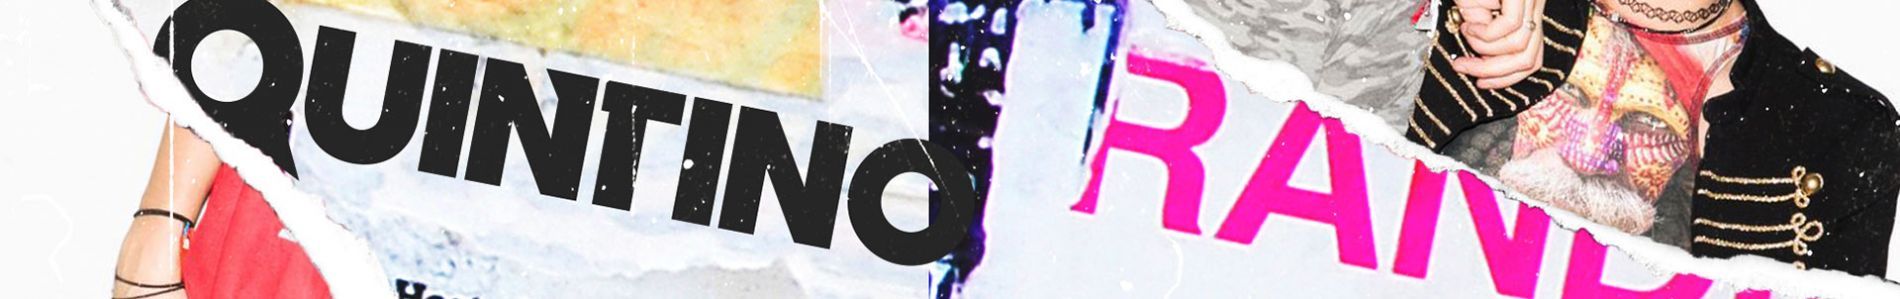 Lost In You header